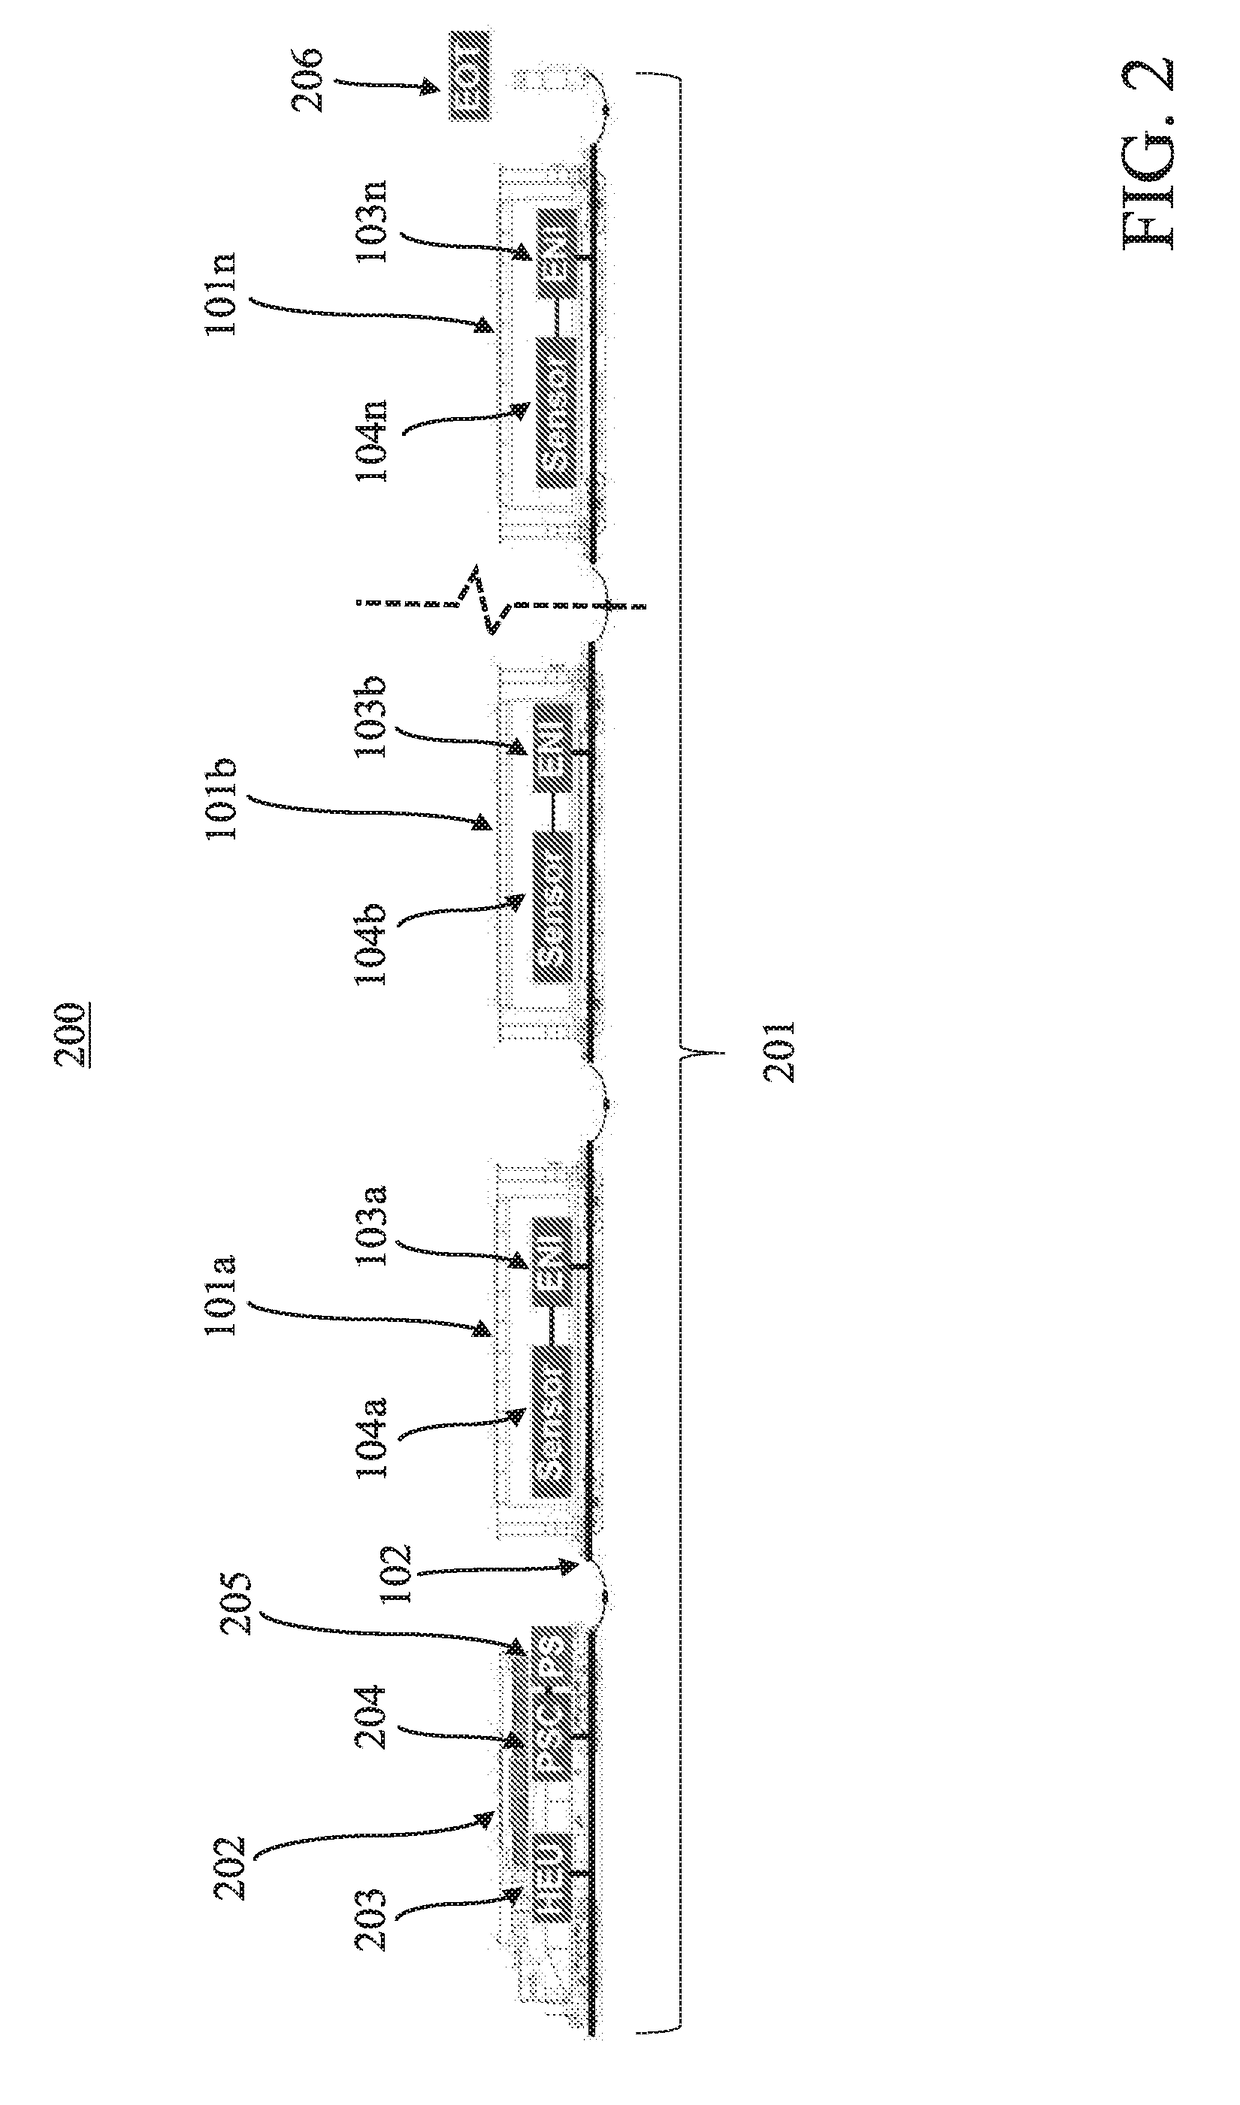 System, Method, and Apparatus for Improving Safety of ECP-Equipped Trains with Flammable Cargo